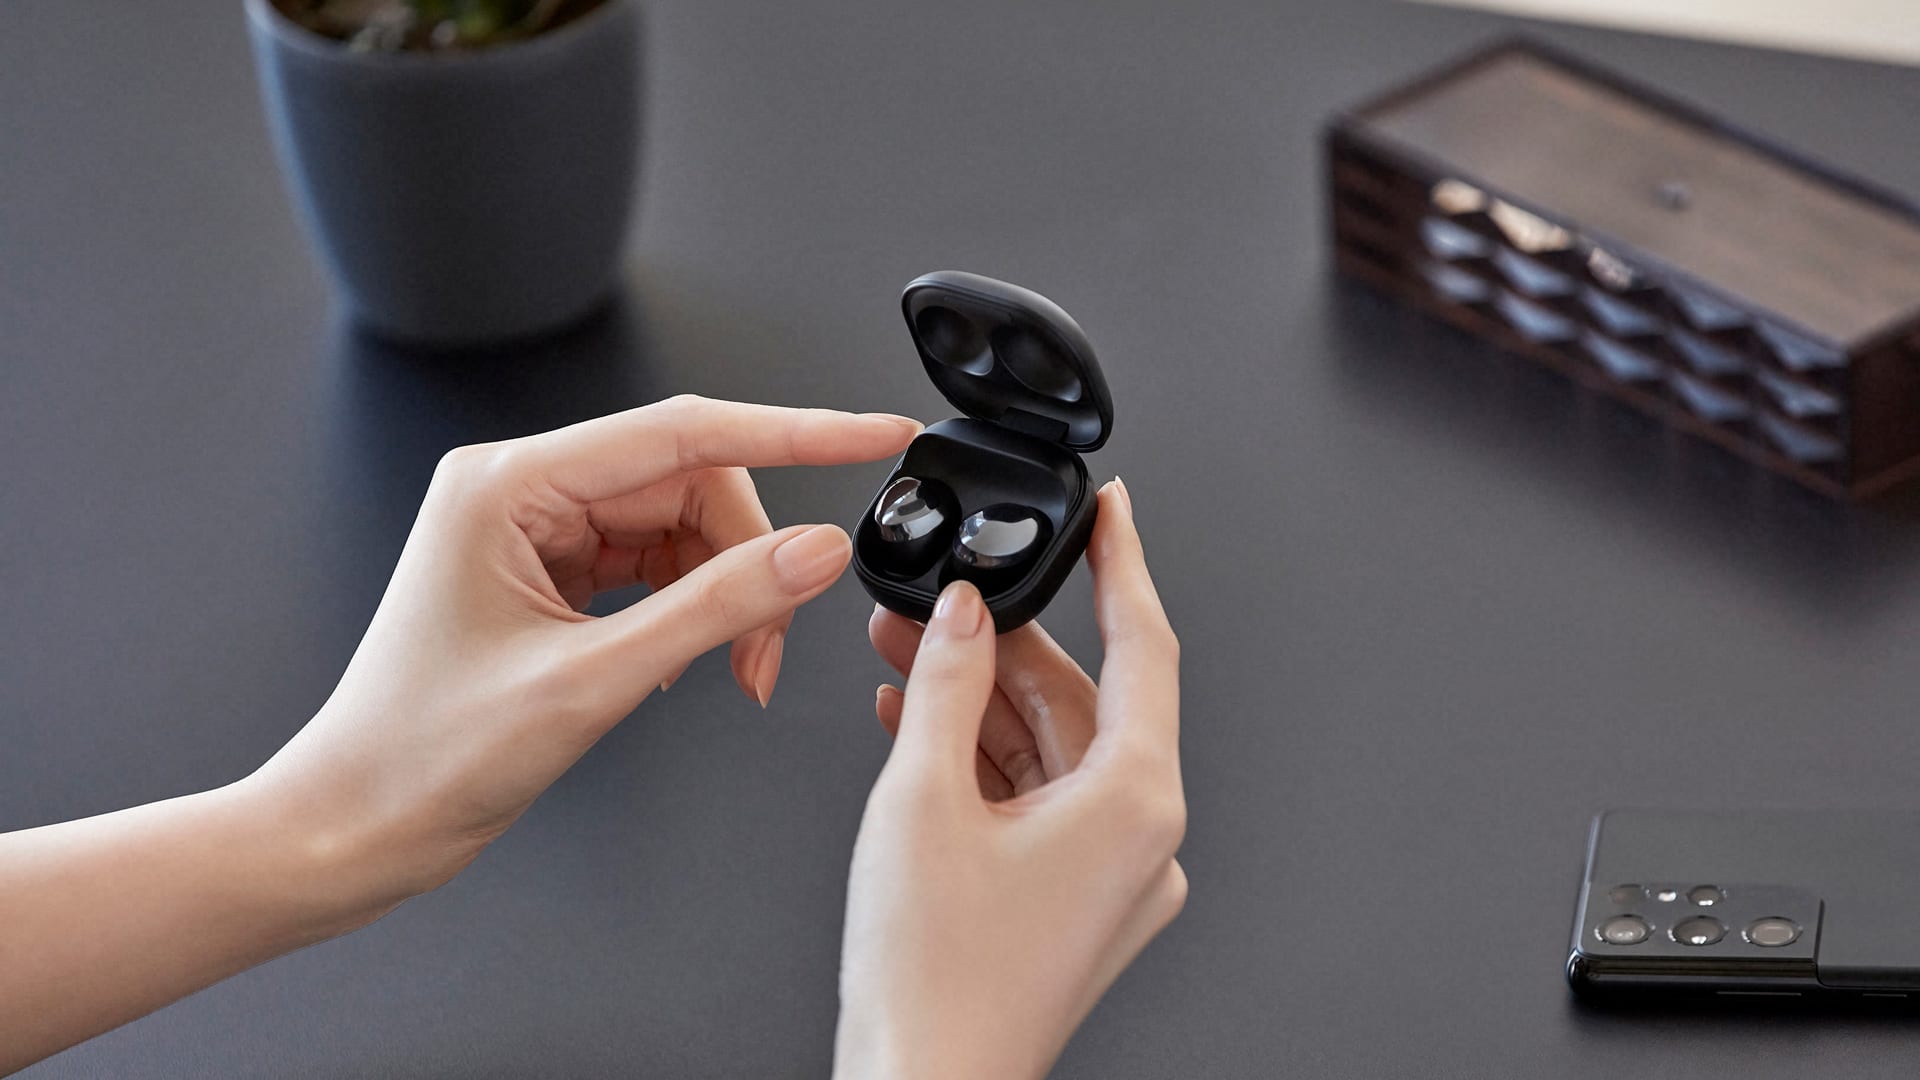 Samsung’s new earbuds have one feature that everyone should steal